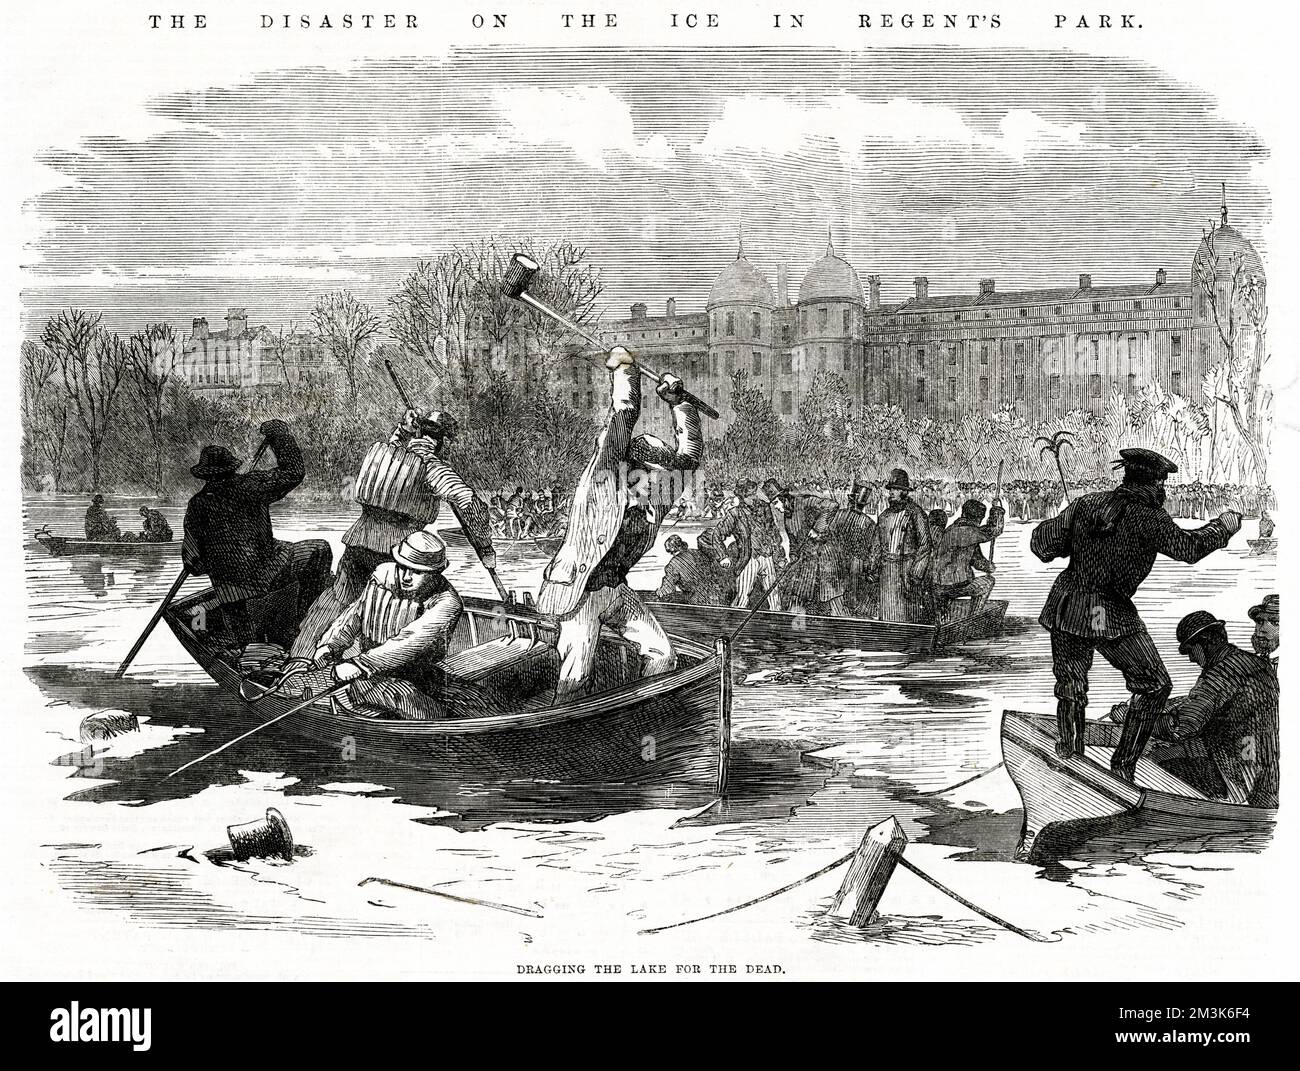 Number of boatmen and policemen dragging the lake in Regent's Park for the bodies of people who had fallen through the ice during an ice skating disaster.     Date: January 1867 Stock Photo